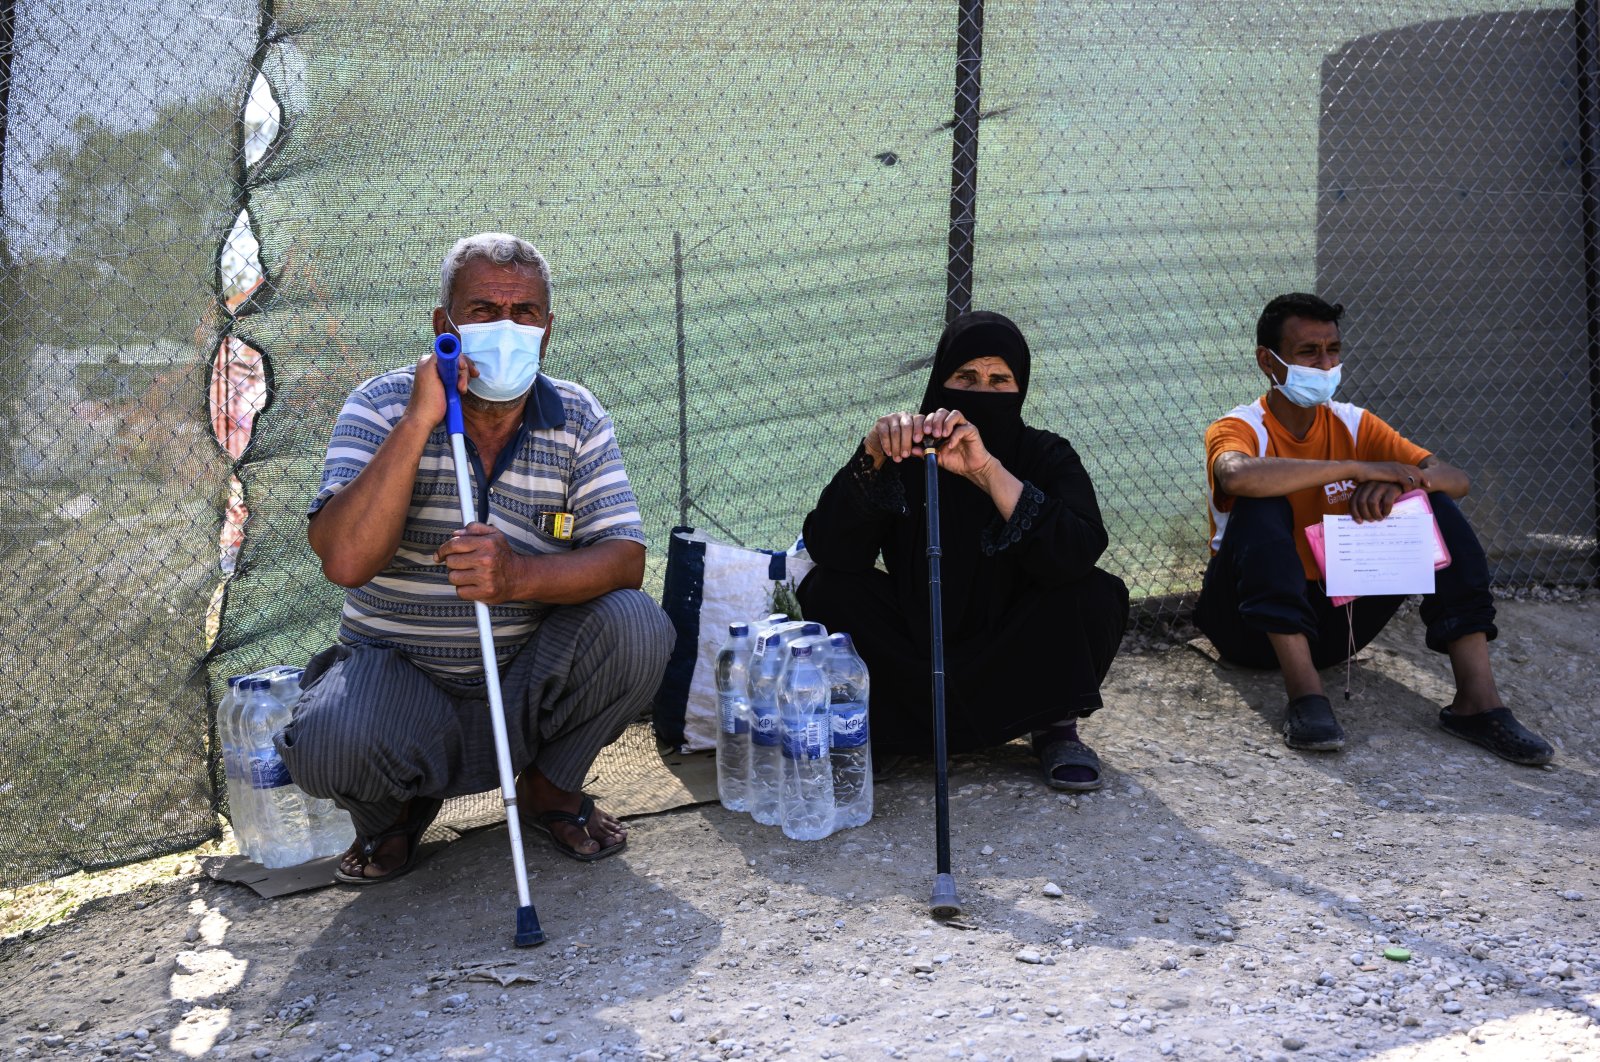 Migrants sit outside the perimeter of the Moria refugee camp on the northeastern Aegean island of Lesbos, Greece, Sept. 2, 2020. (AP Photo/Vangelis Papantonis)